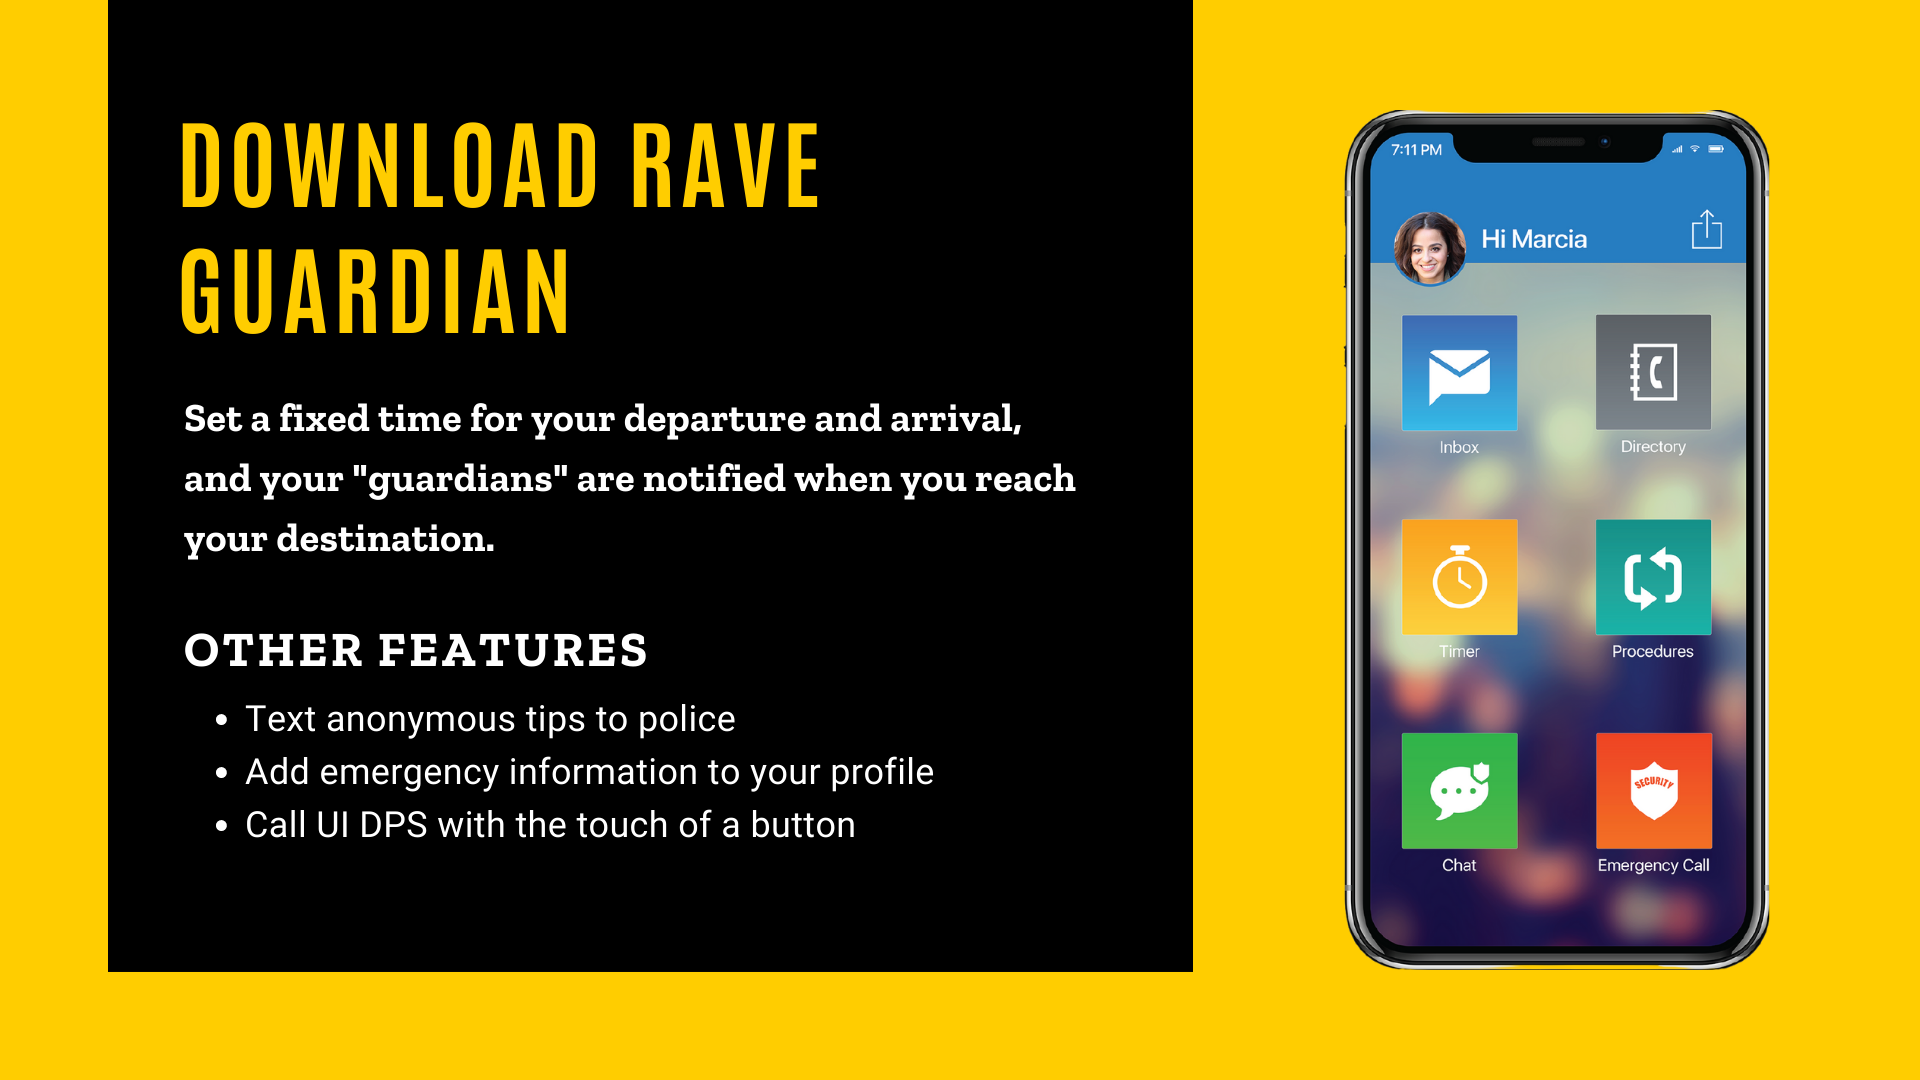 [ID] Gold text on a black background says "Download Rave Guardian Set a fixed time for your departure and arrival, and your "guardians" are notified when you reach your destination. Other features; Text anonymous tips to police, Add emergency information to your profile, Call UI DPS with the touch of a button